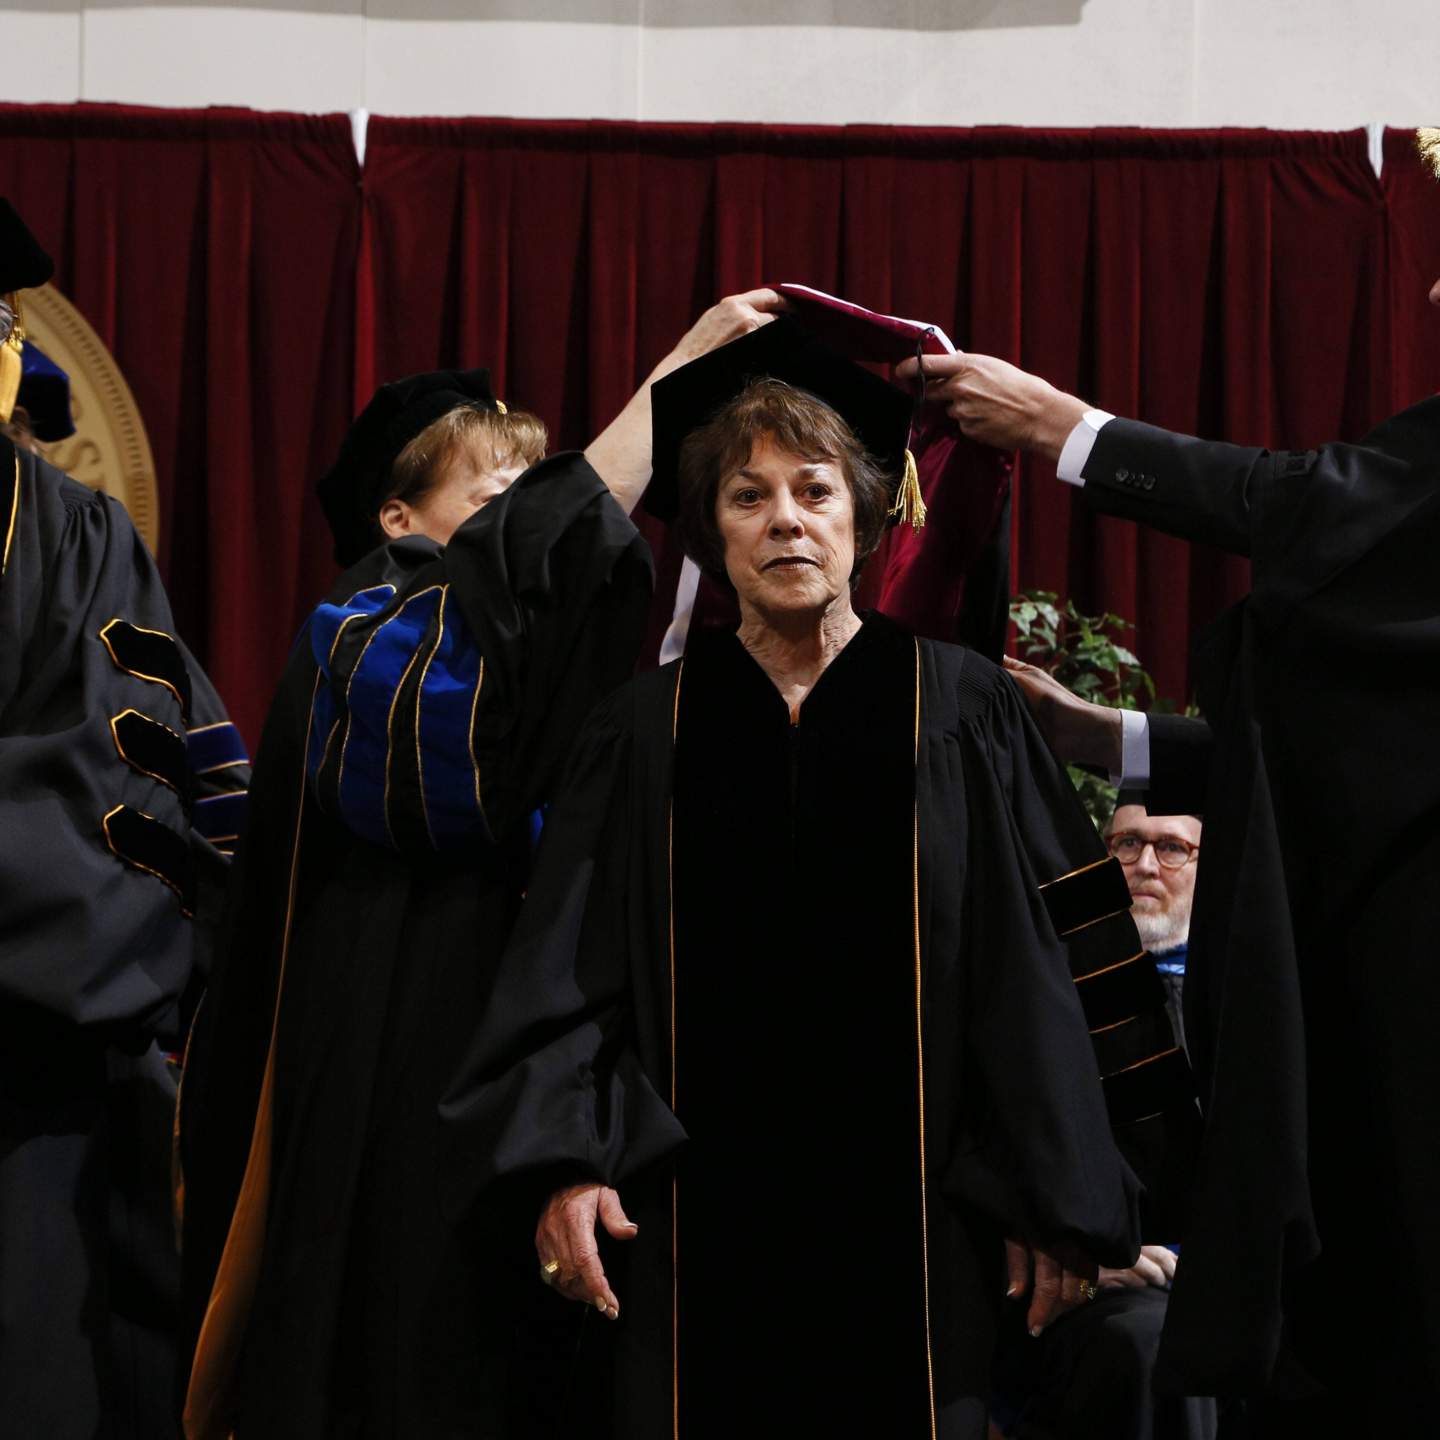 Sally B. Wittliff hooded by President Trauth and Provost Bourgeois